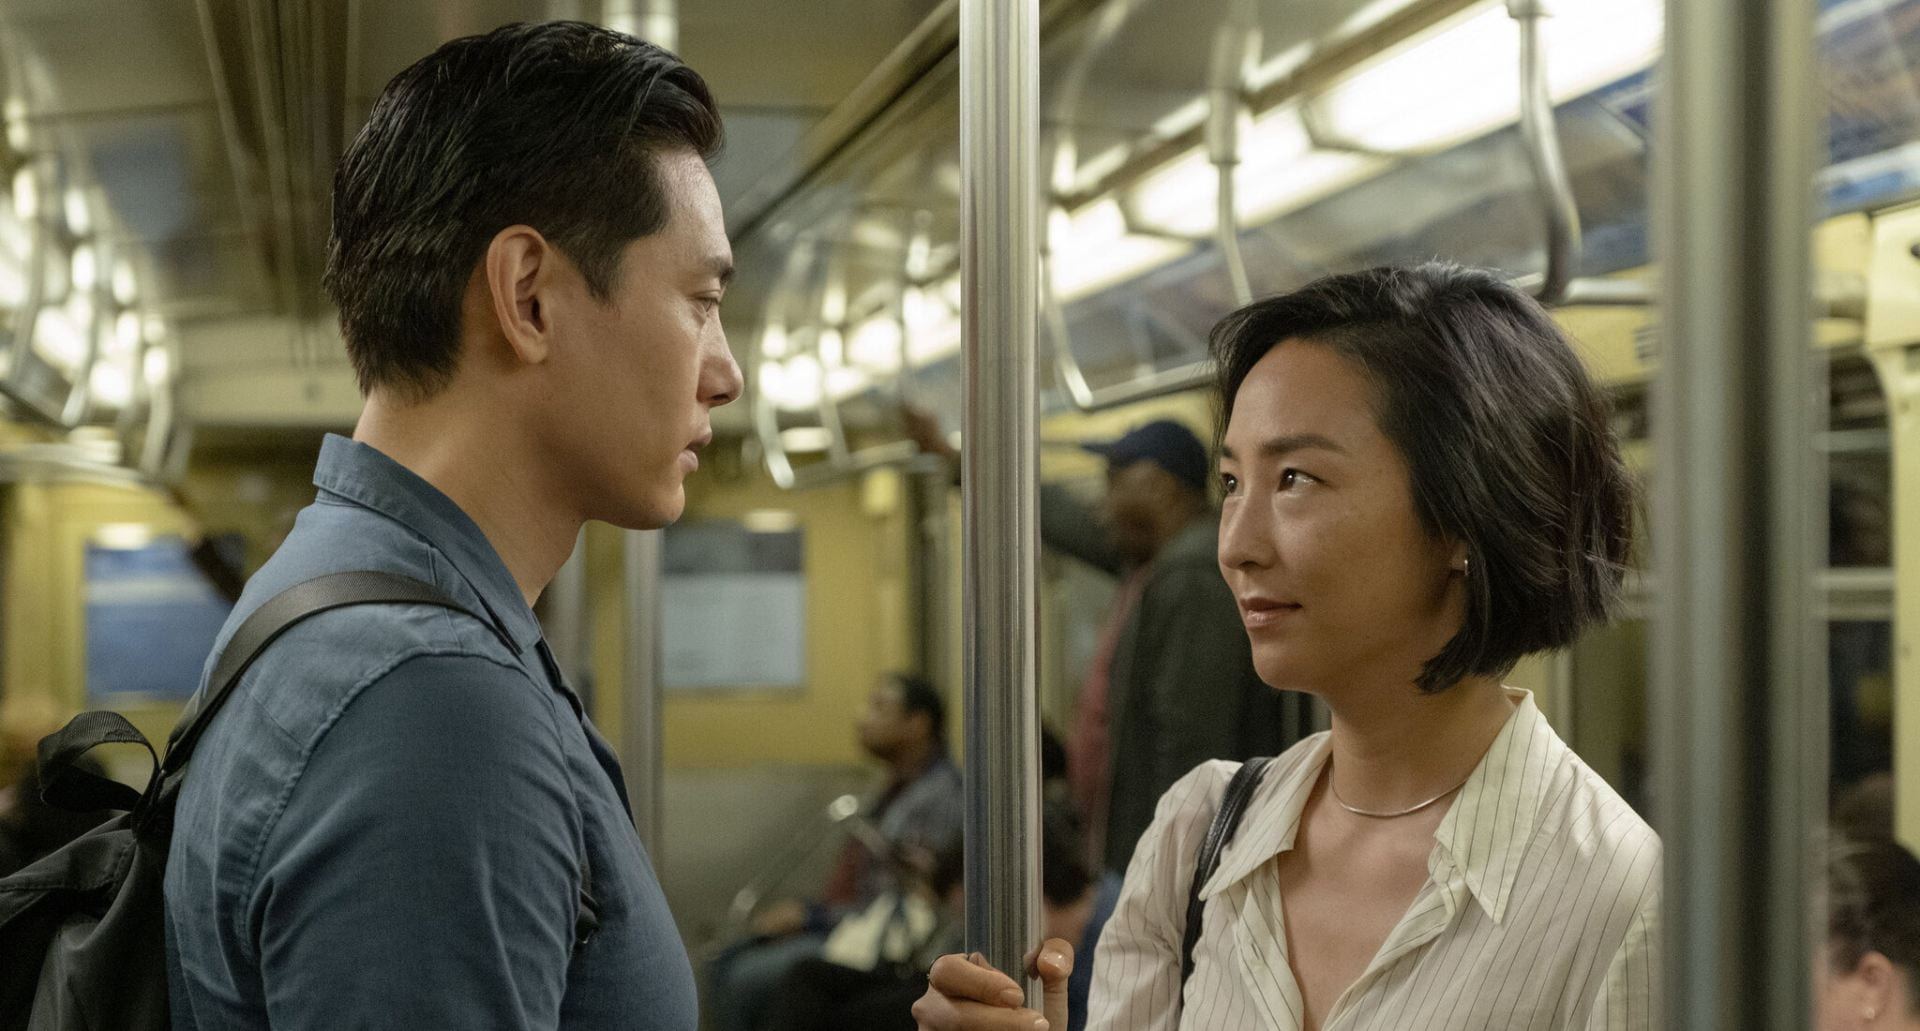 A man and woman look at each other in a subway car